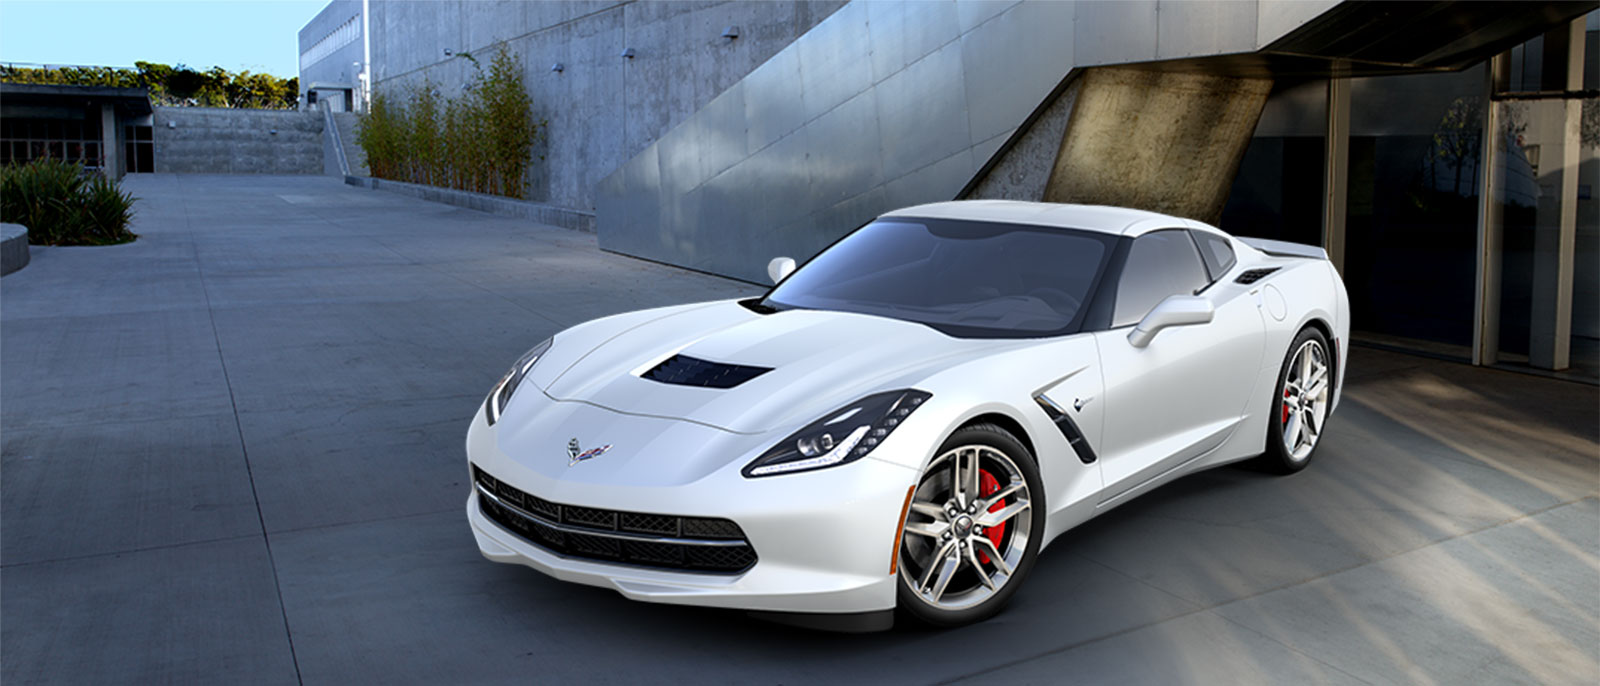 2015 Chevrolet Corvette Stingray: One of Car and Driver's 10 Best Cars